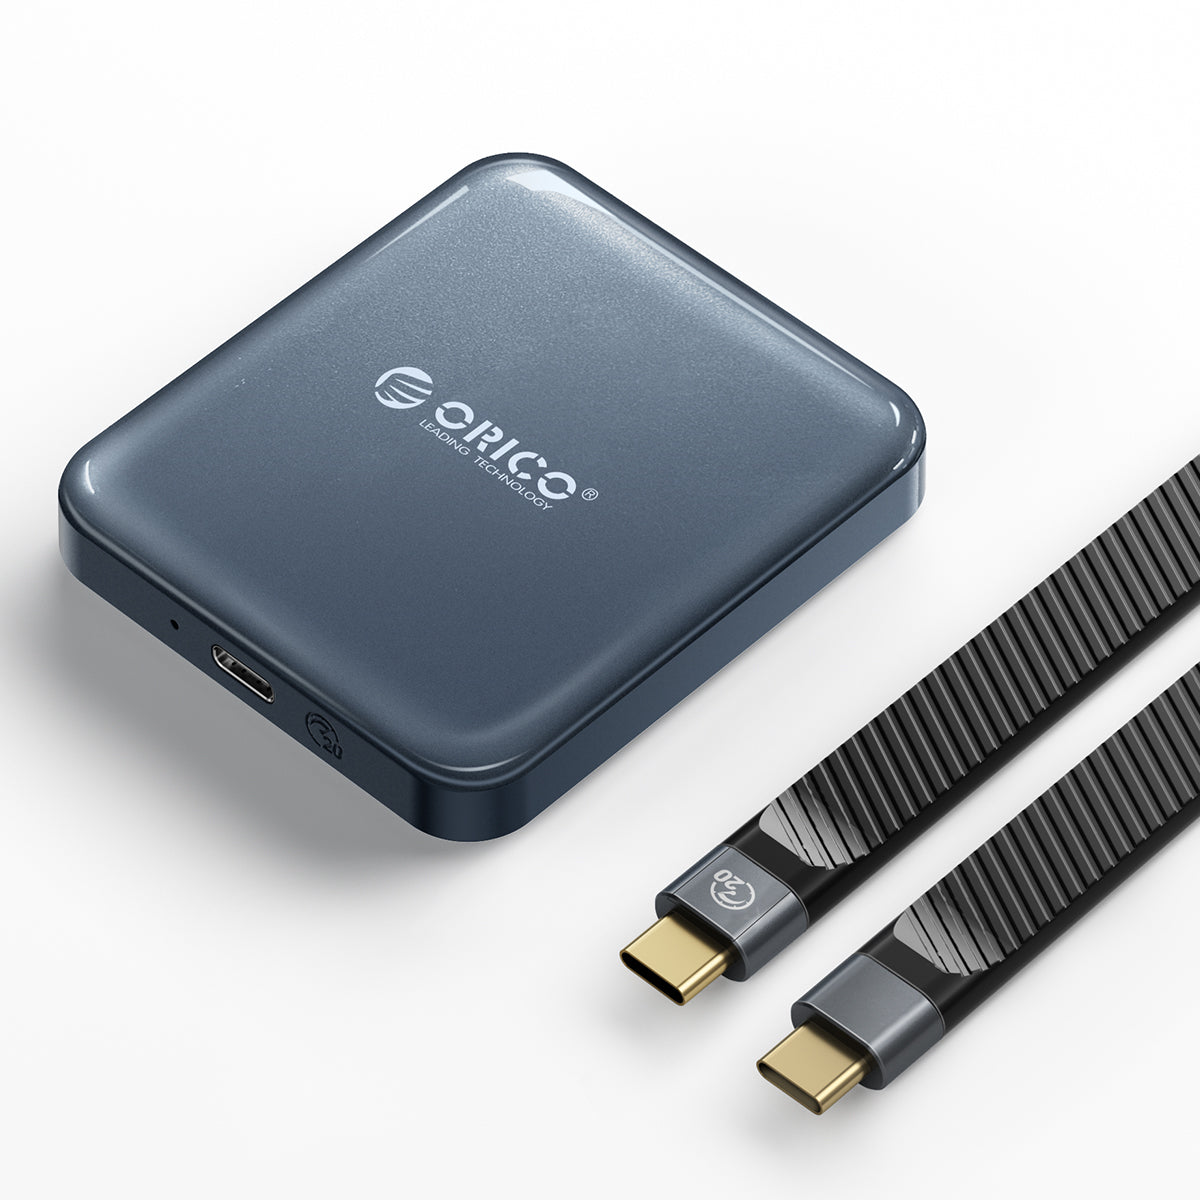 ORICO Magnetic Portable SSD, designed for iPhone Users